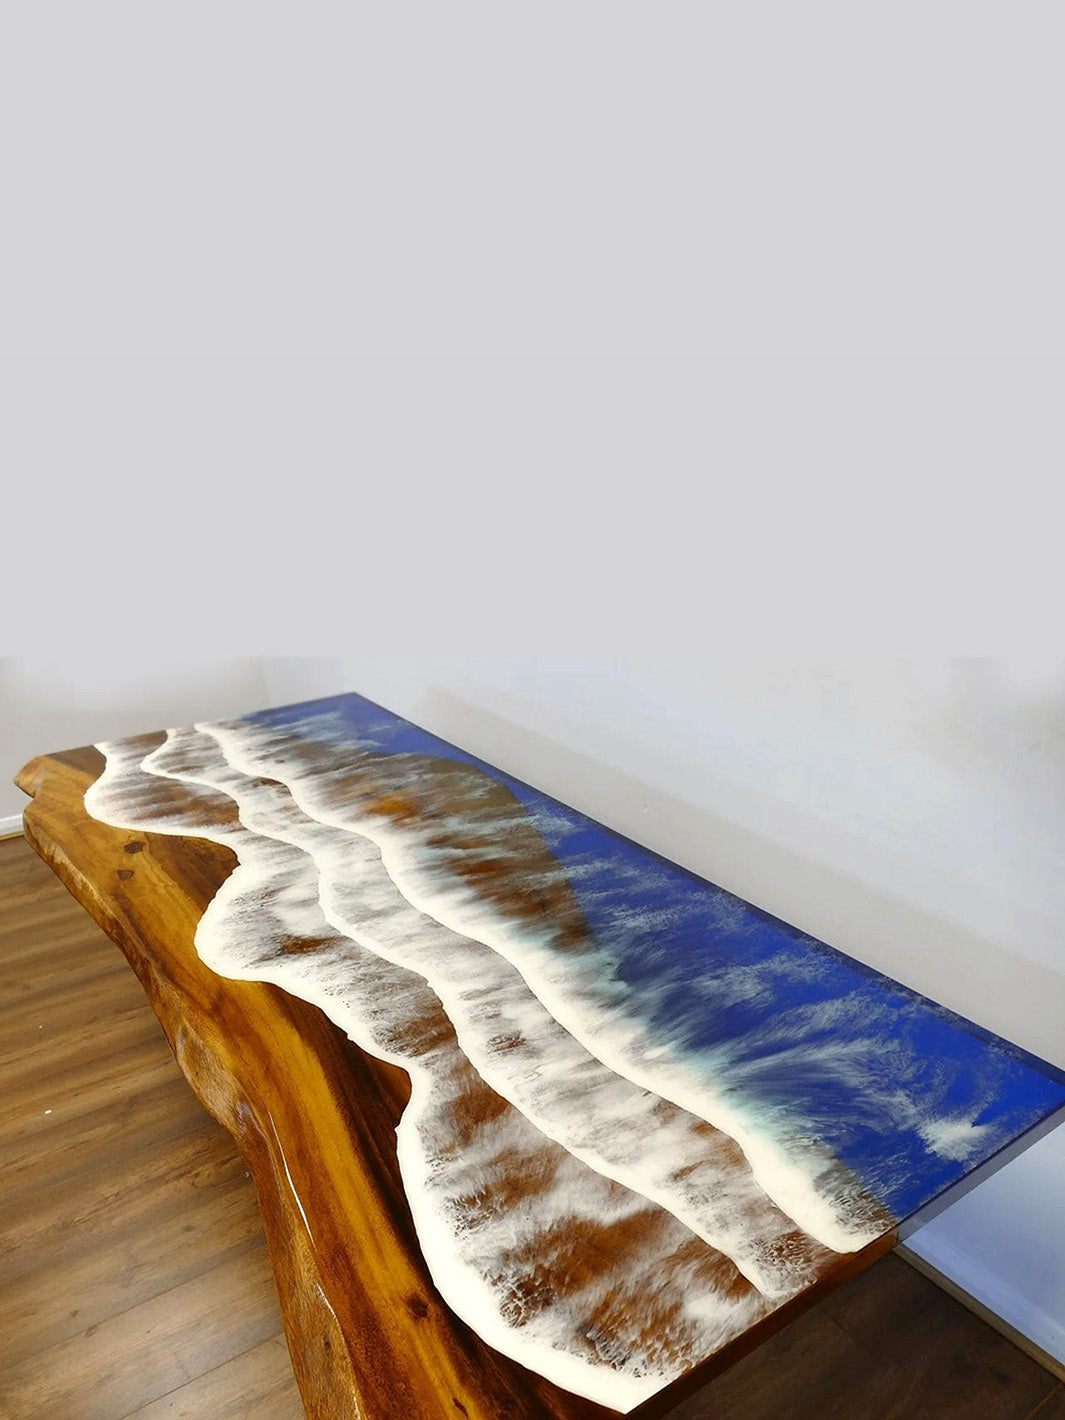 Handcrafted River Beach Epoxy Resin Wooden Dining Table | 180x80cm Made 4 Decor Tables MDR0011-5